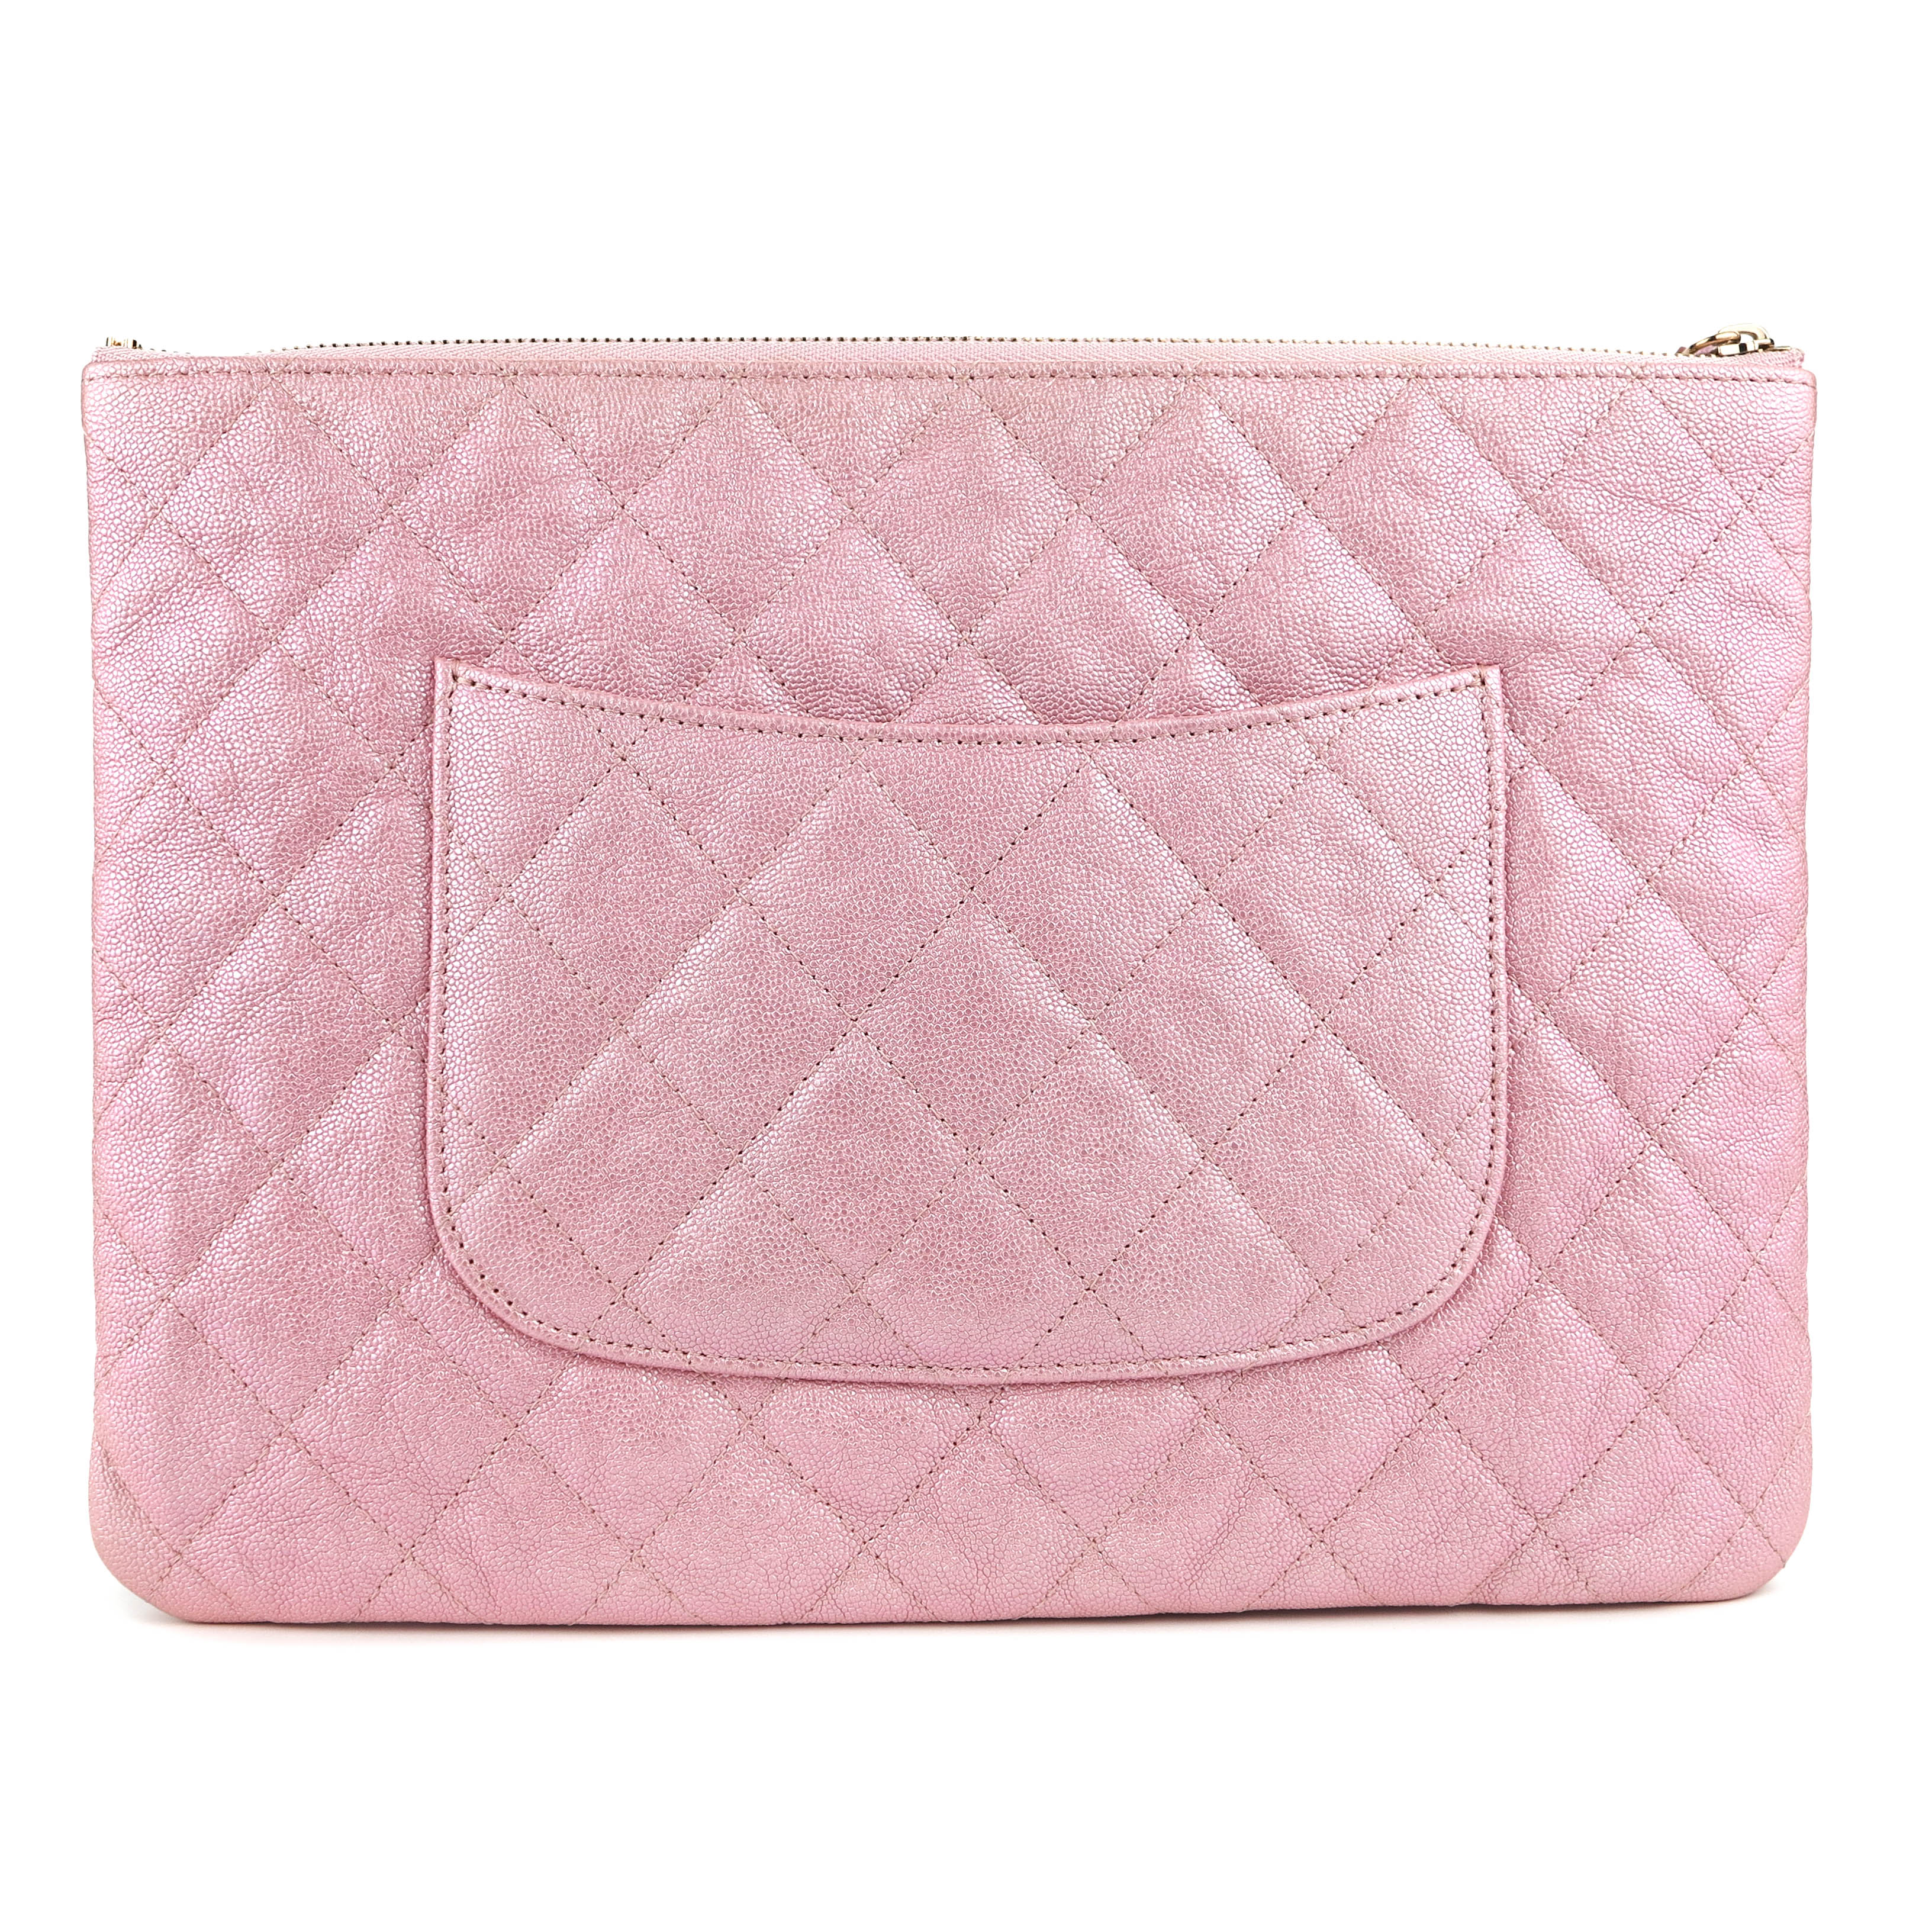 Night by the C Pouch Clutch Large Ocase in 19S Iridescent Pink Caviar